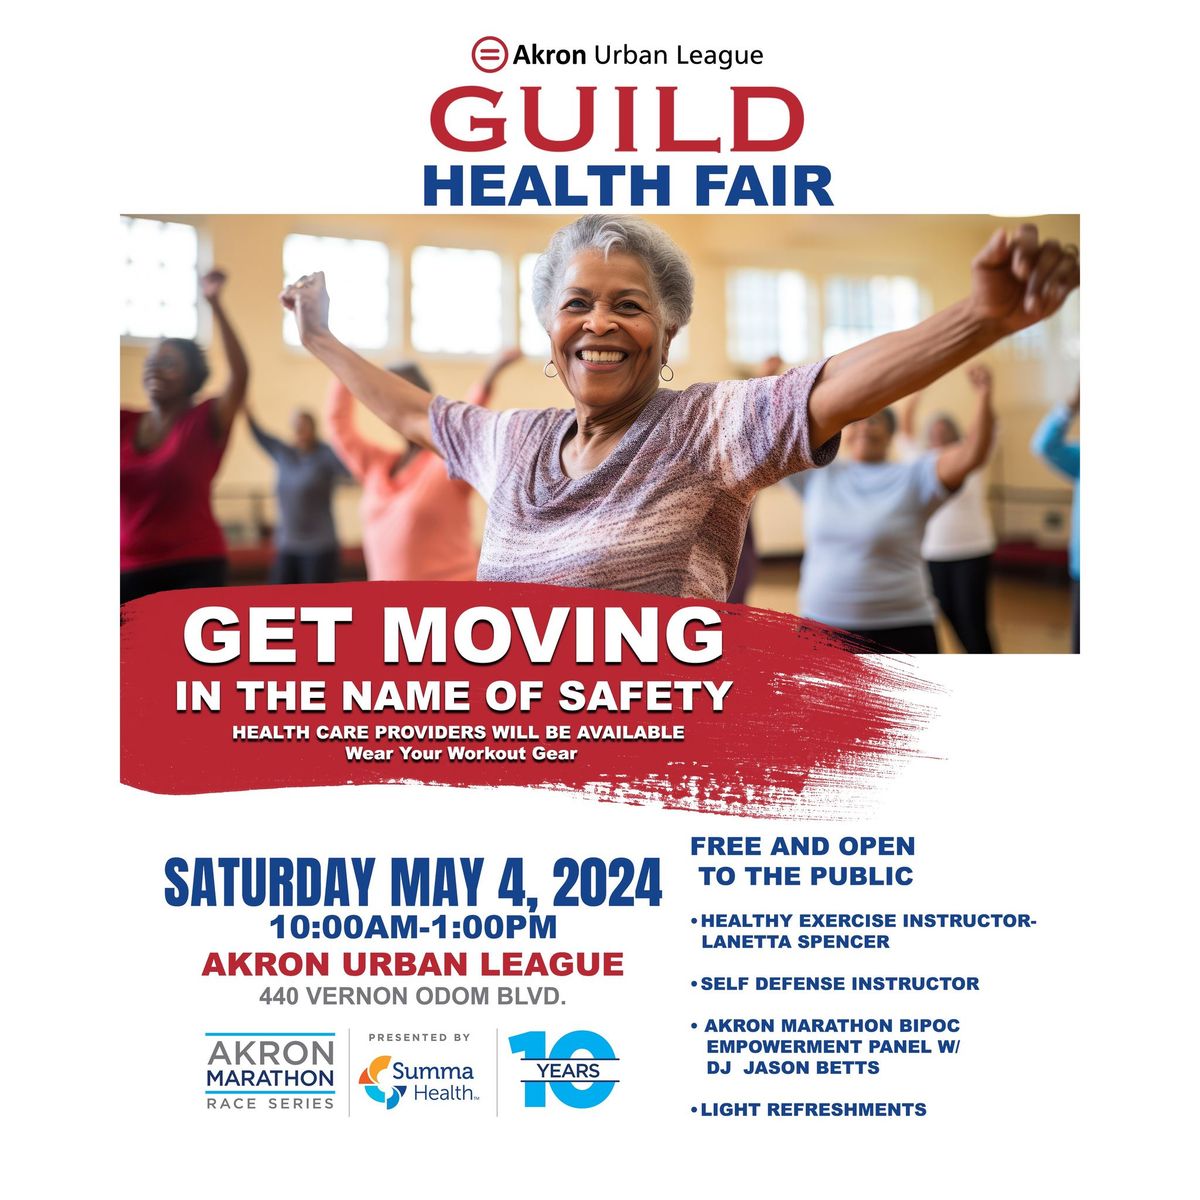 Akron Urban League GUILD Health Fair! 'Get Moving in the Name of Safety'